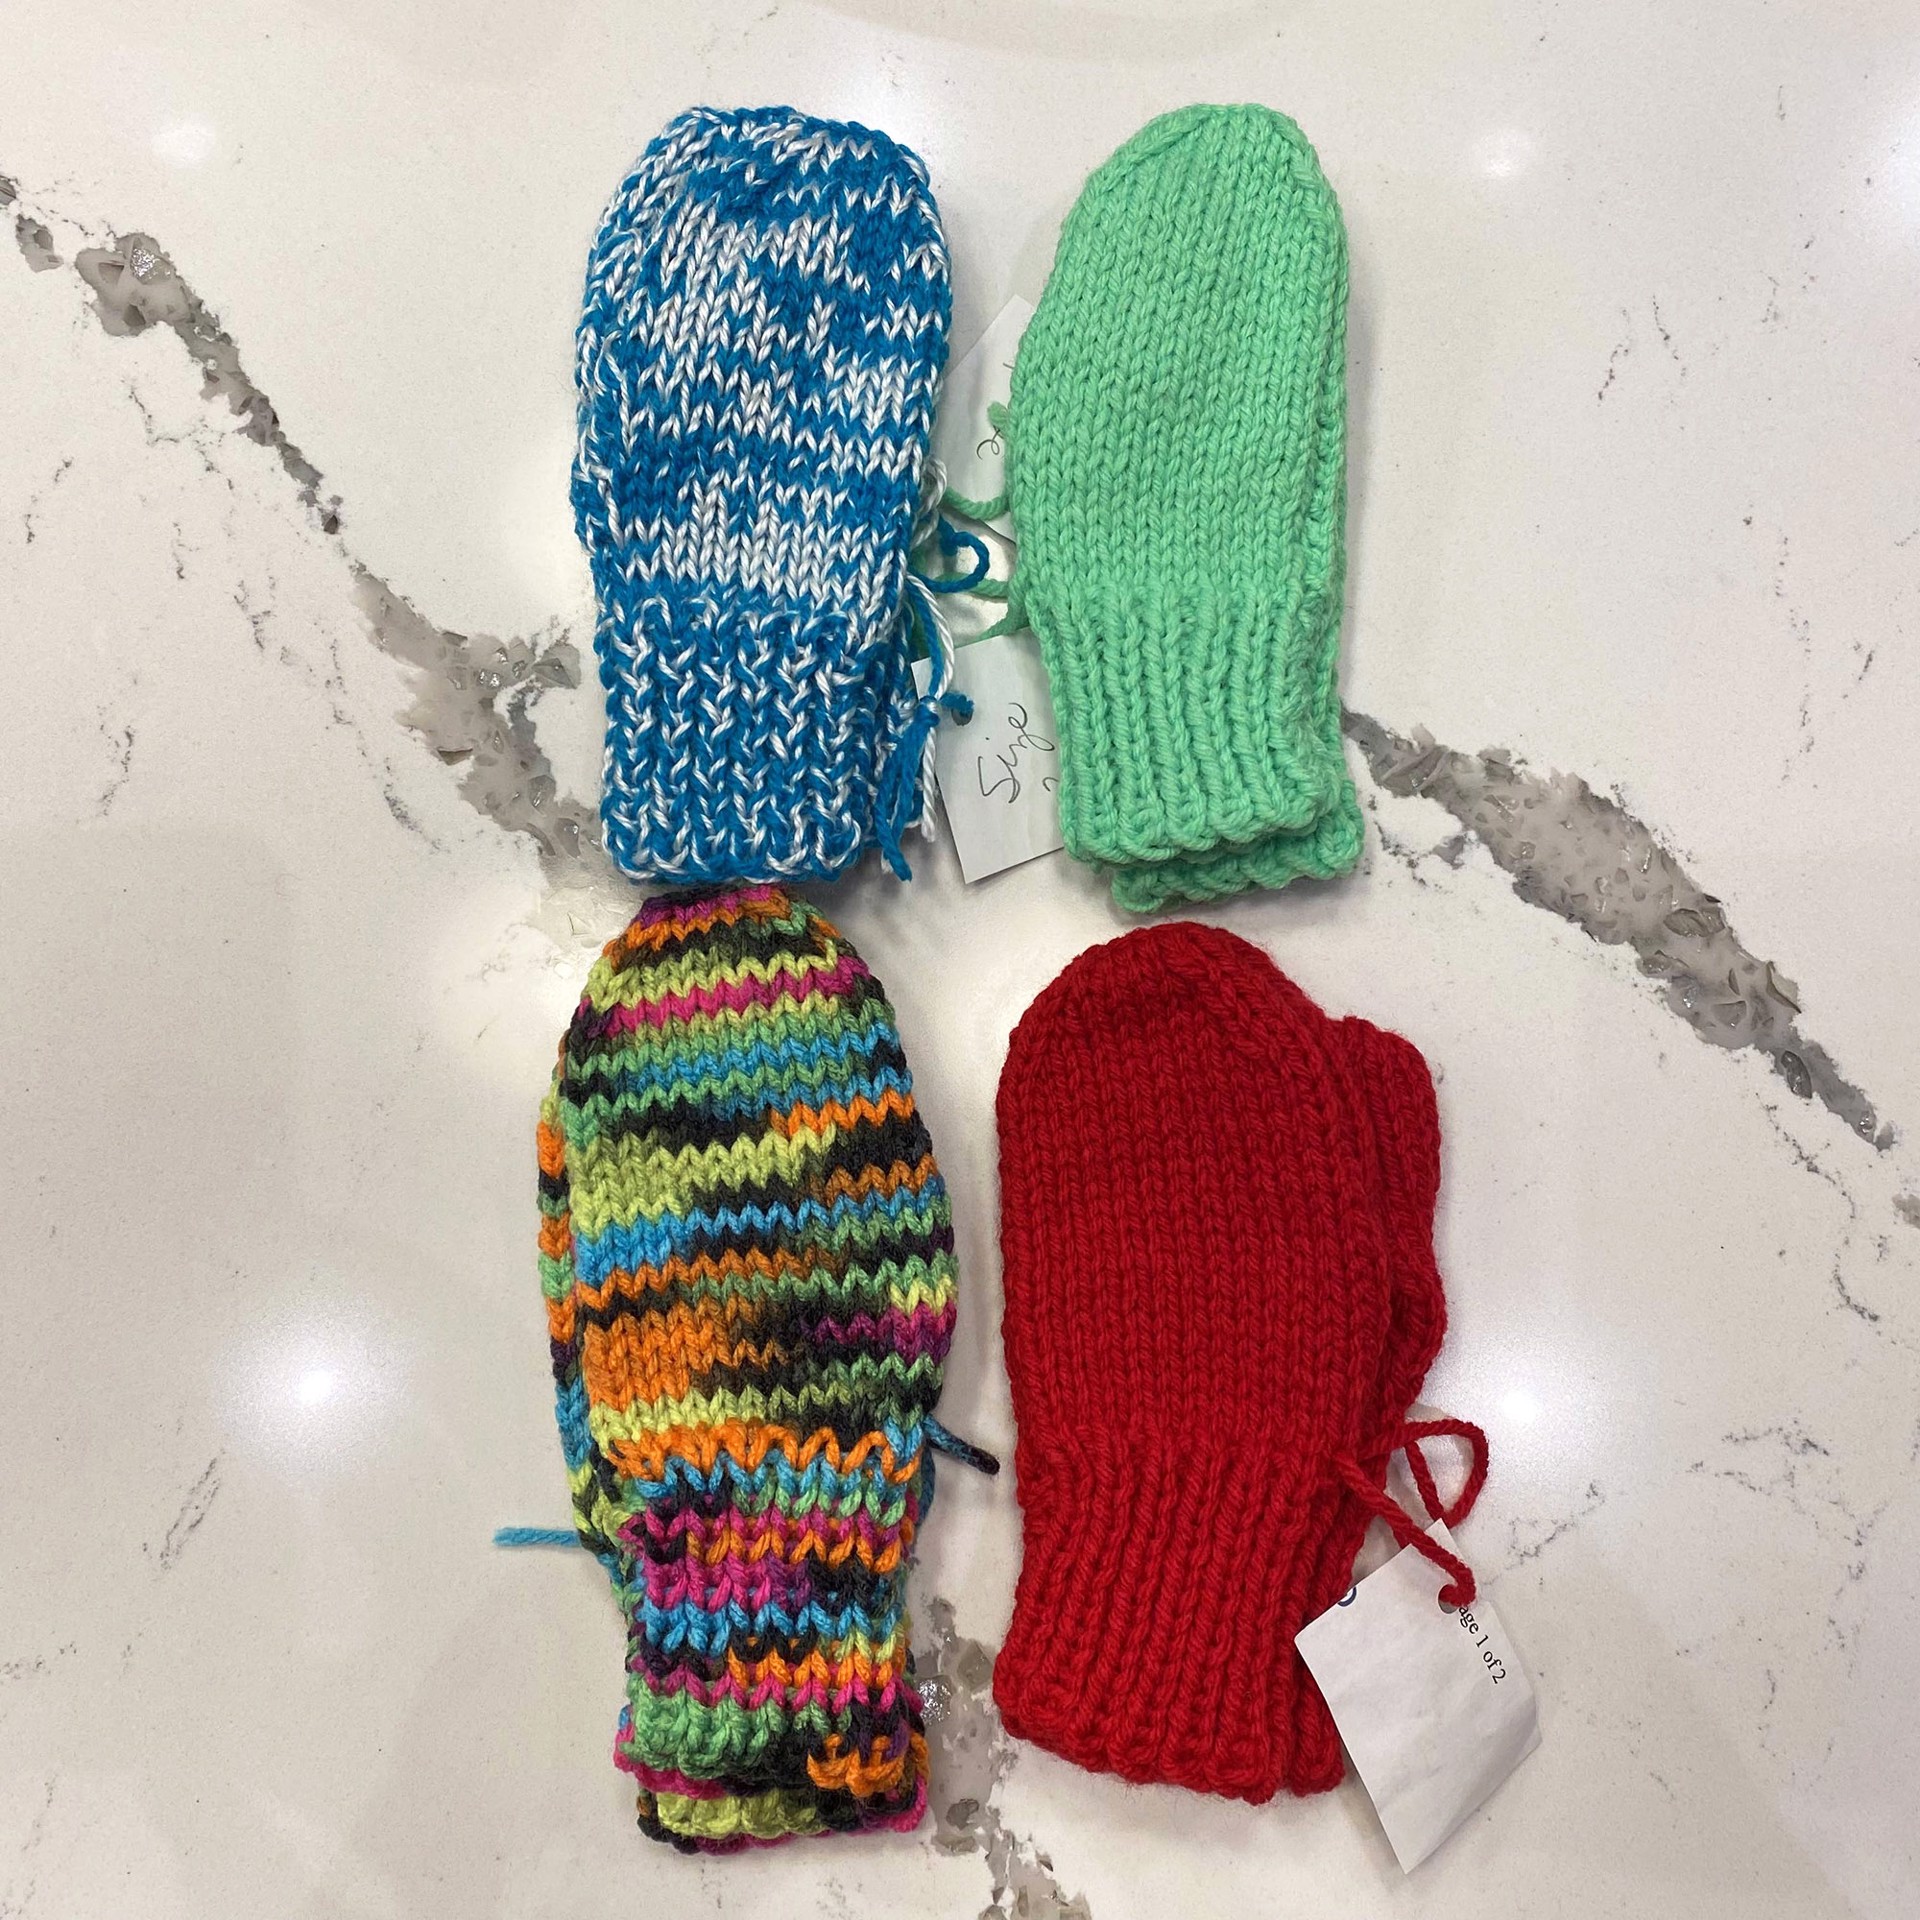 Handmade Mittens - Size 2 by Cathy Miller